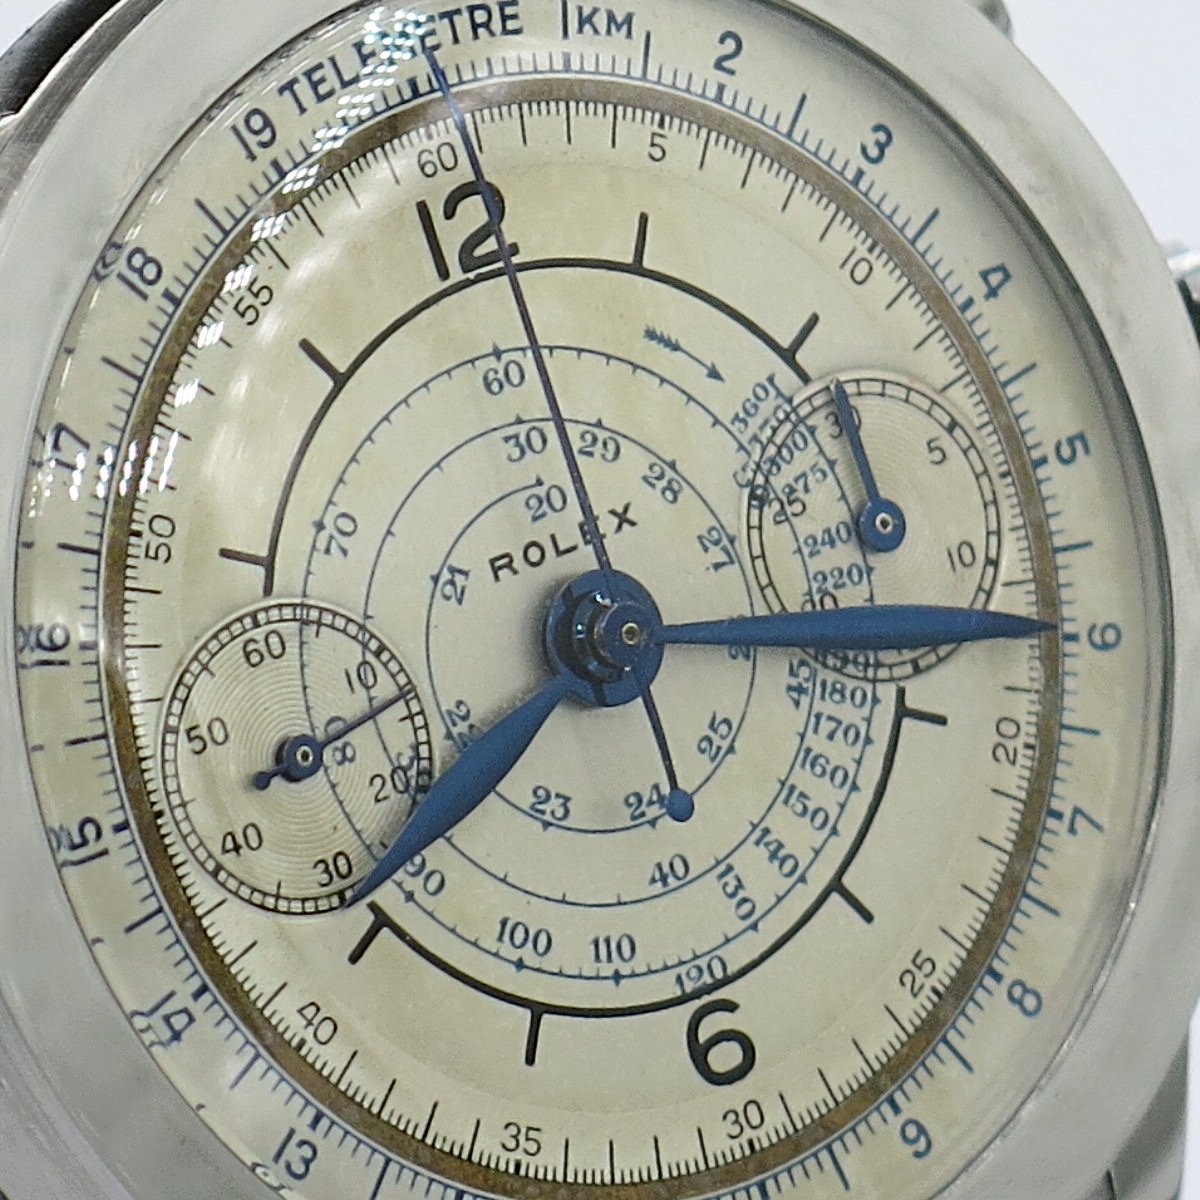 Rolex 2508 "Sector Dial"